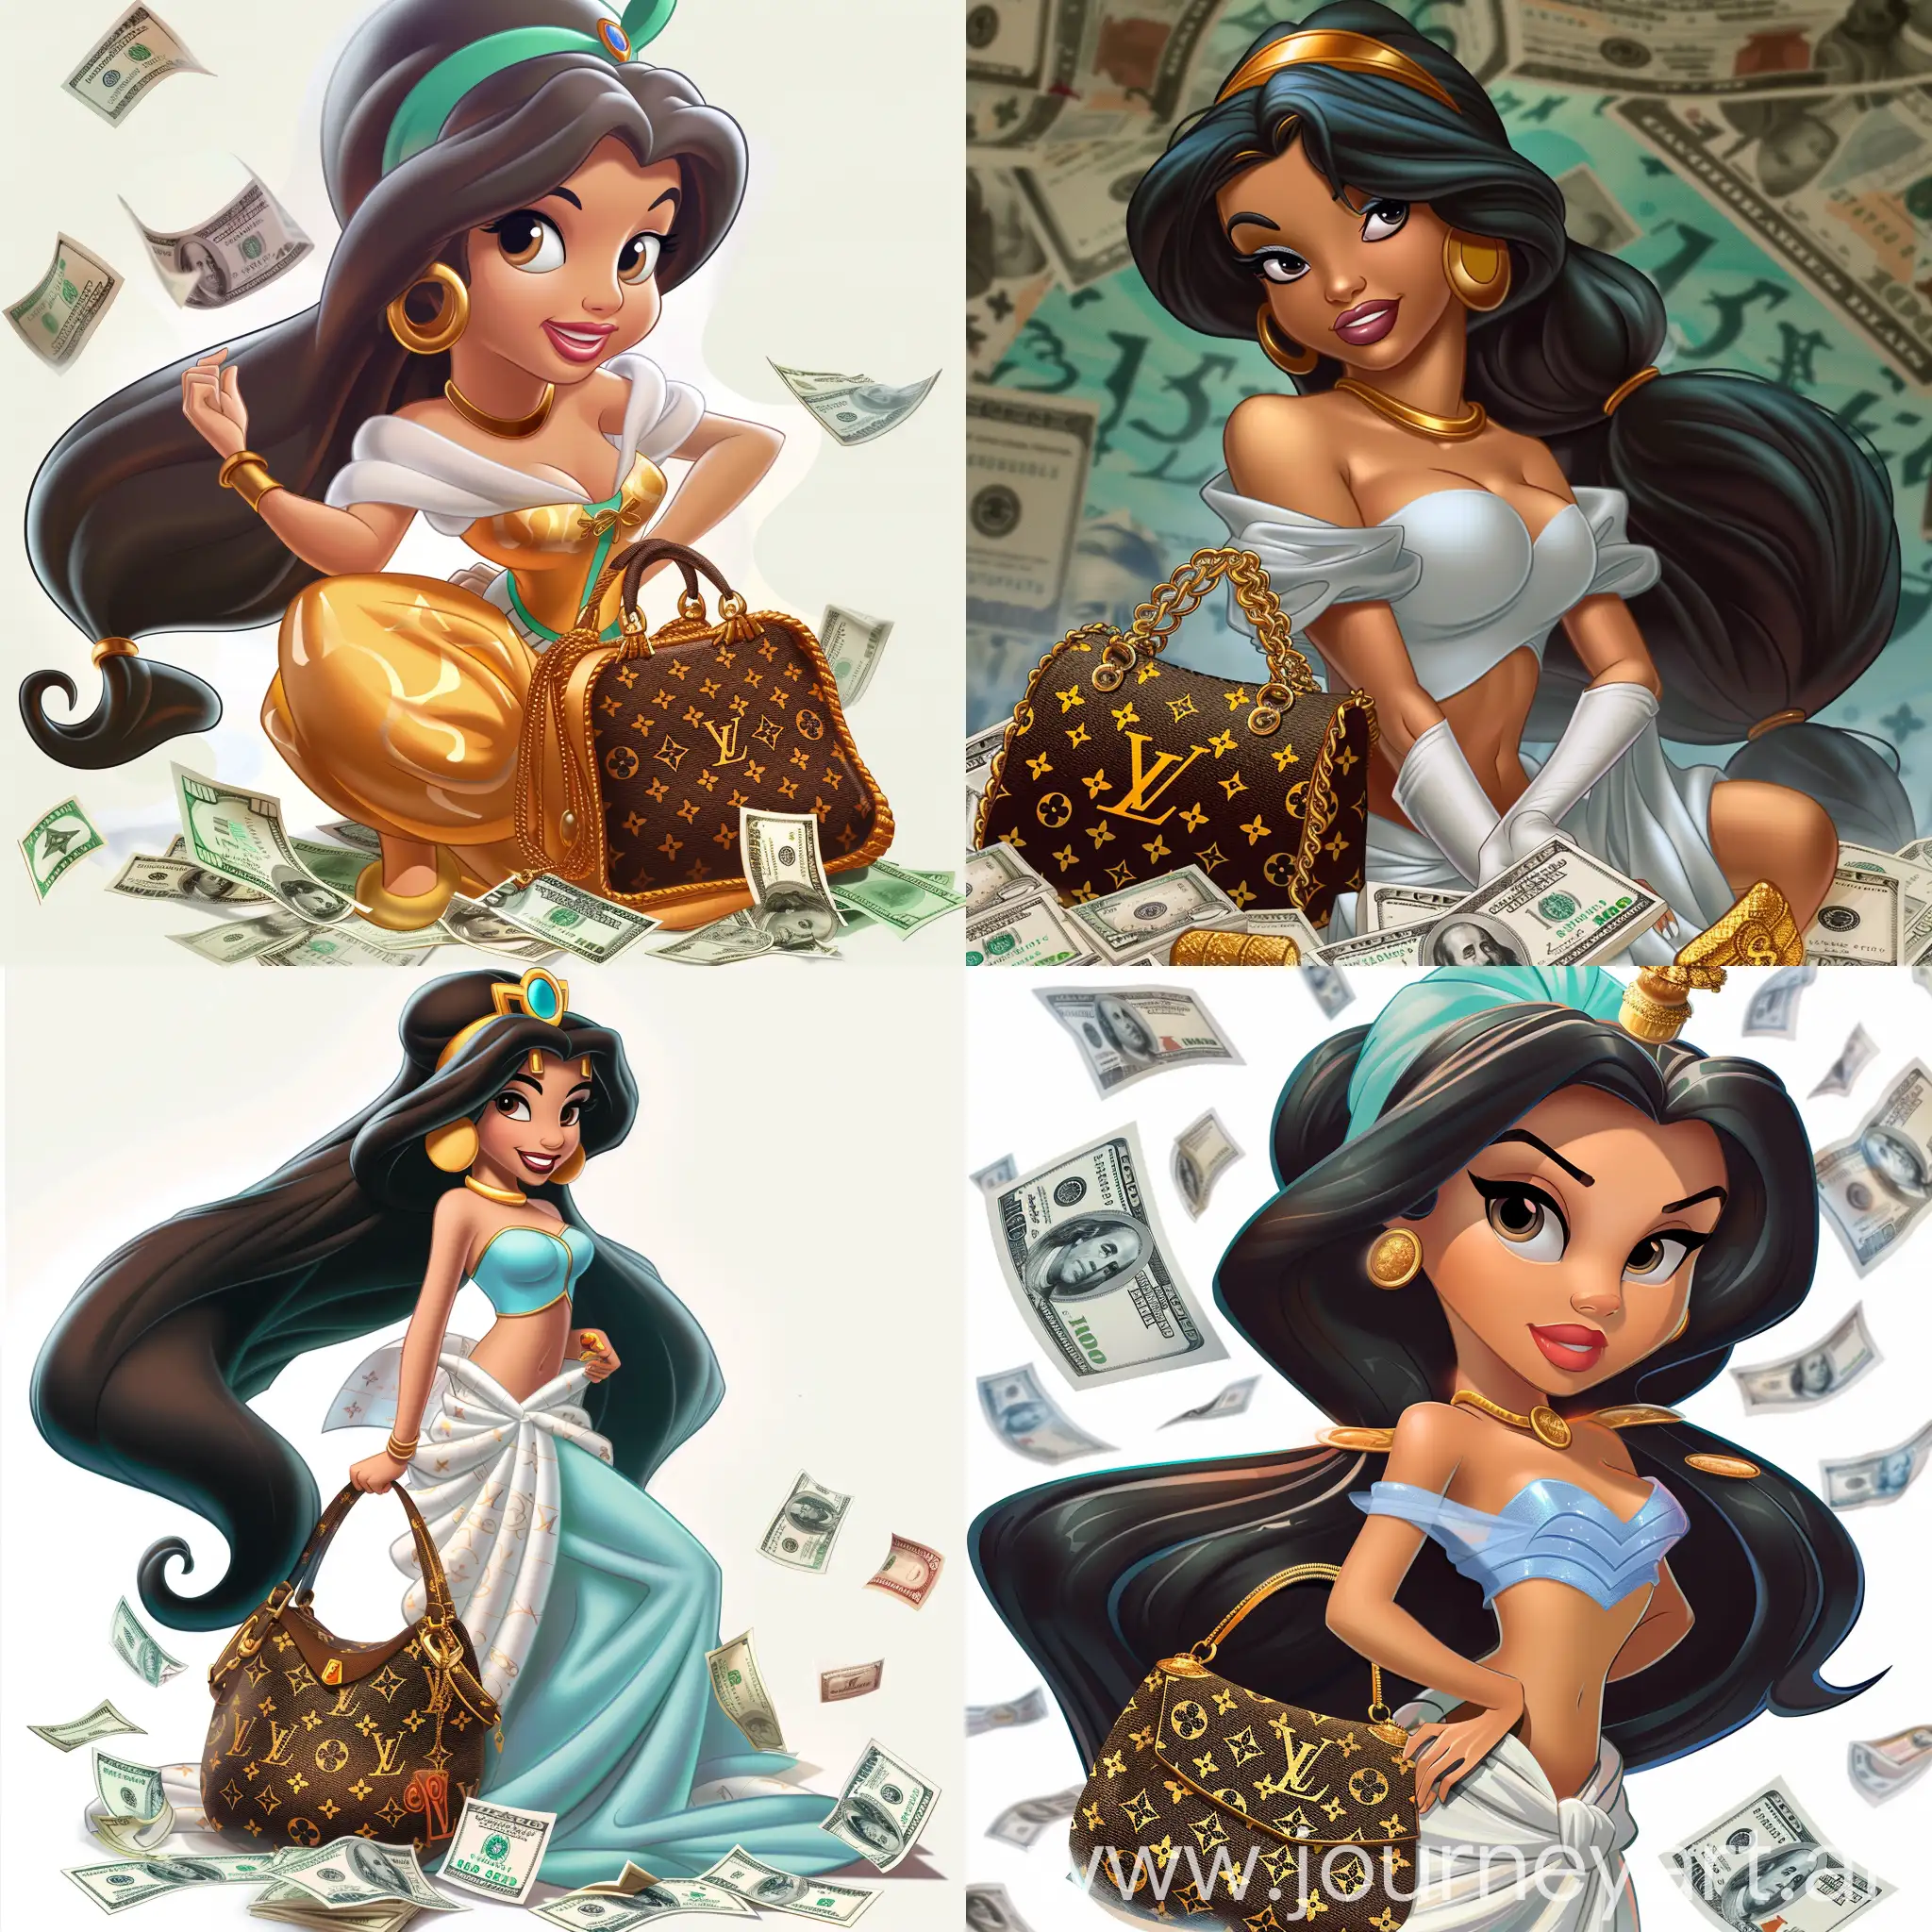 Wealthy-Princess-Jasmine-with-Louis-Vuitton-Bag-Surrounded-by-Cash-in-Cartoon-Style